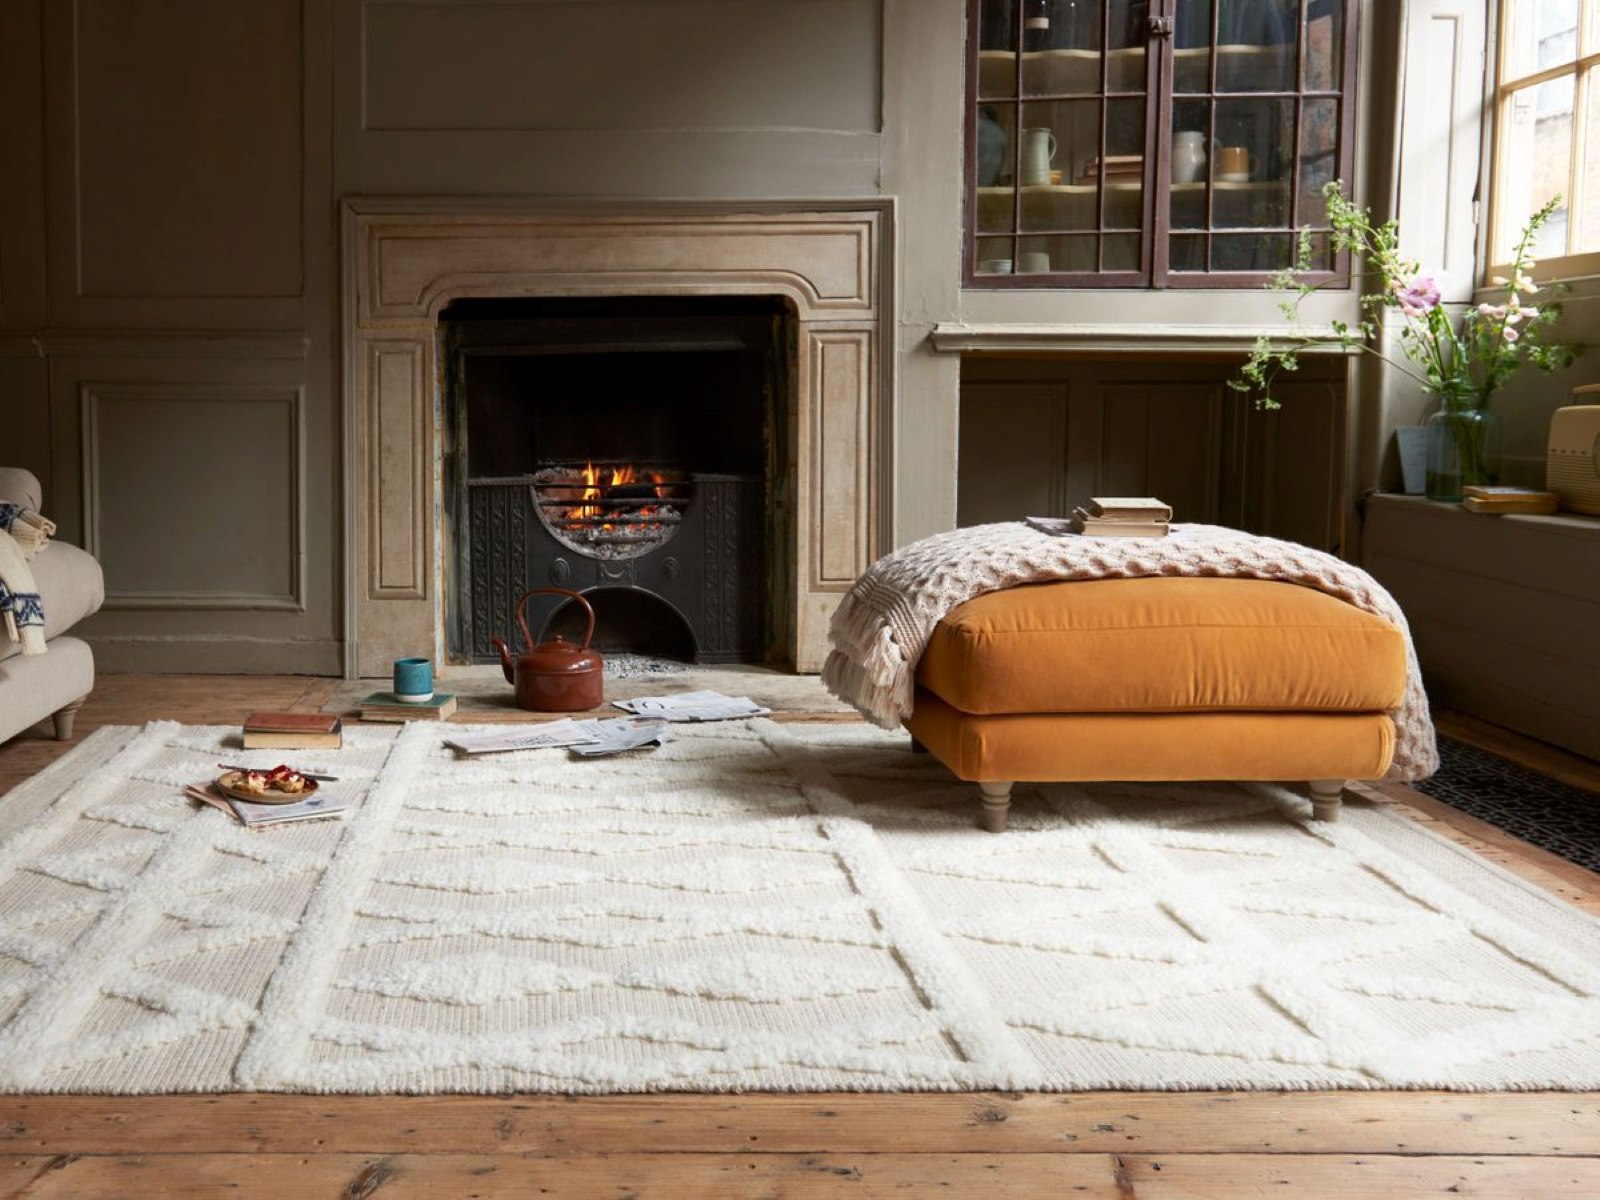 How To Clean Wool Area Rugs